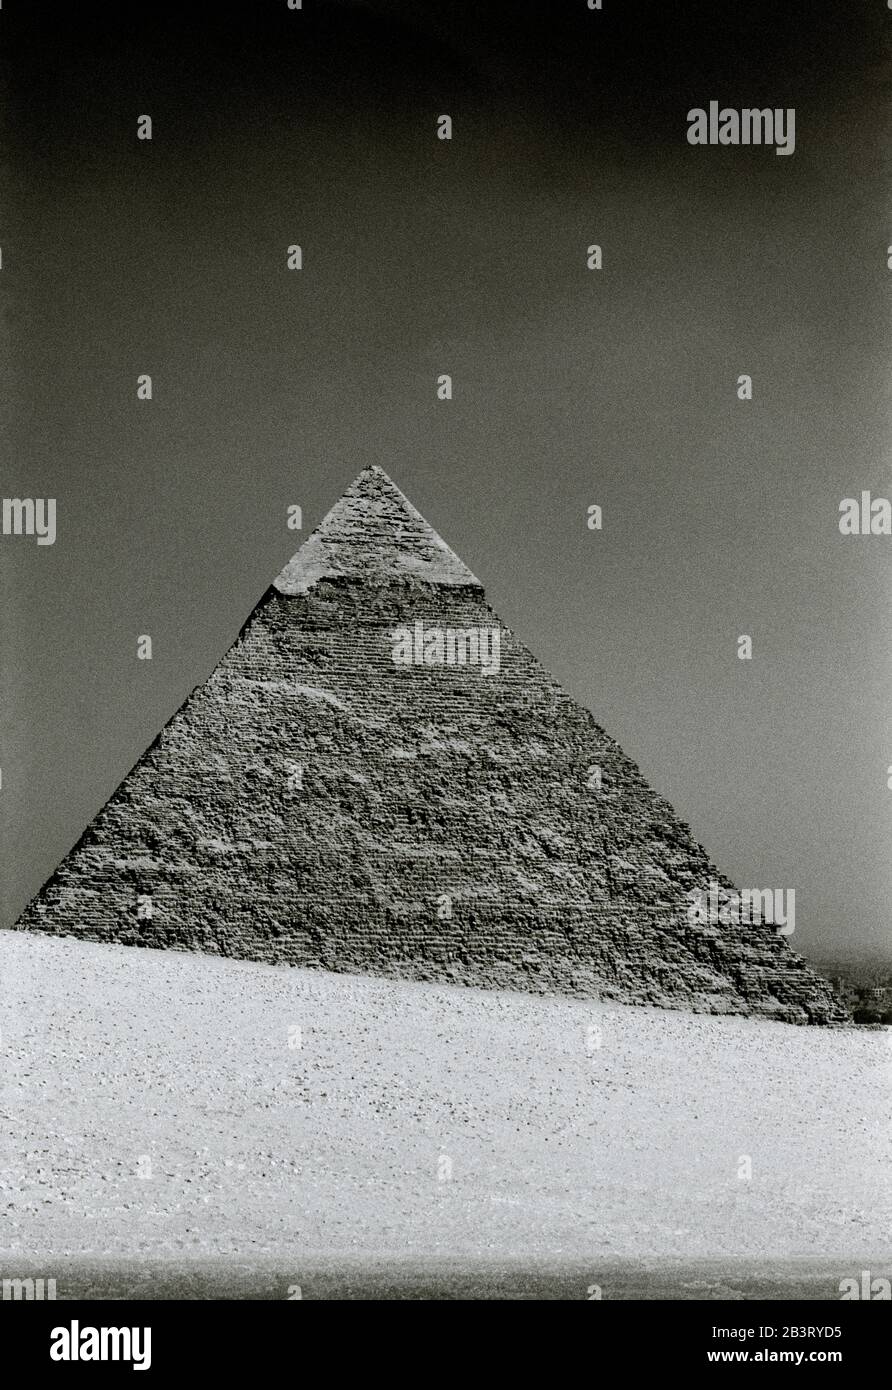 Black And White Travel Photography - Pyramid of Khafre at the Pyramids of Giza in Cairo in Egypt in North Africa Middle East - Ancient History Stock Photo